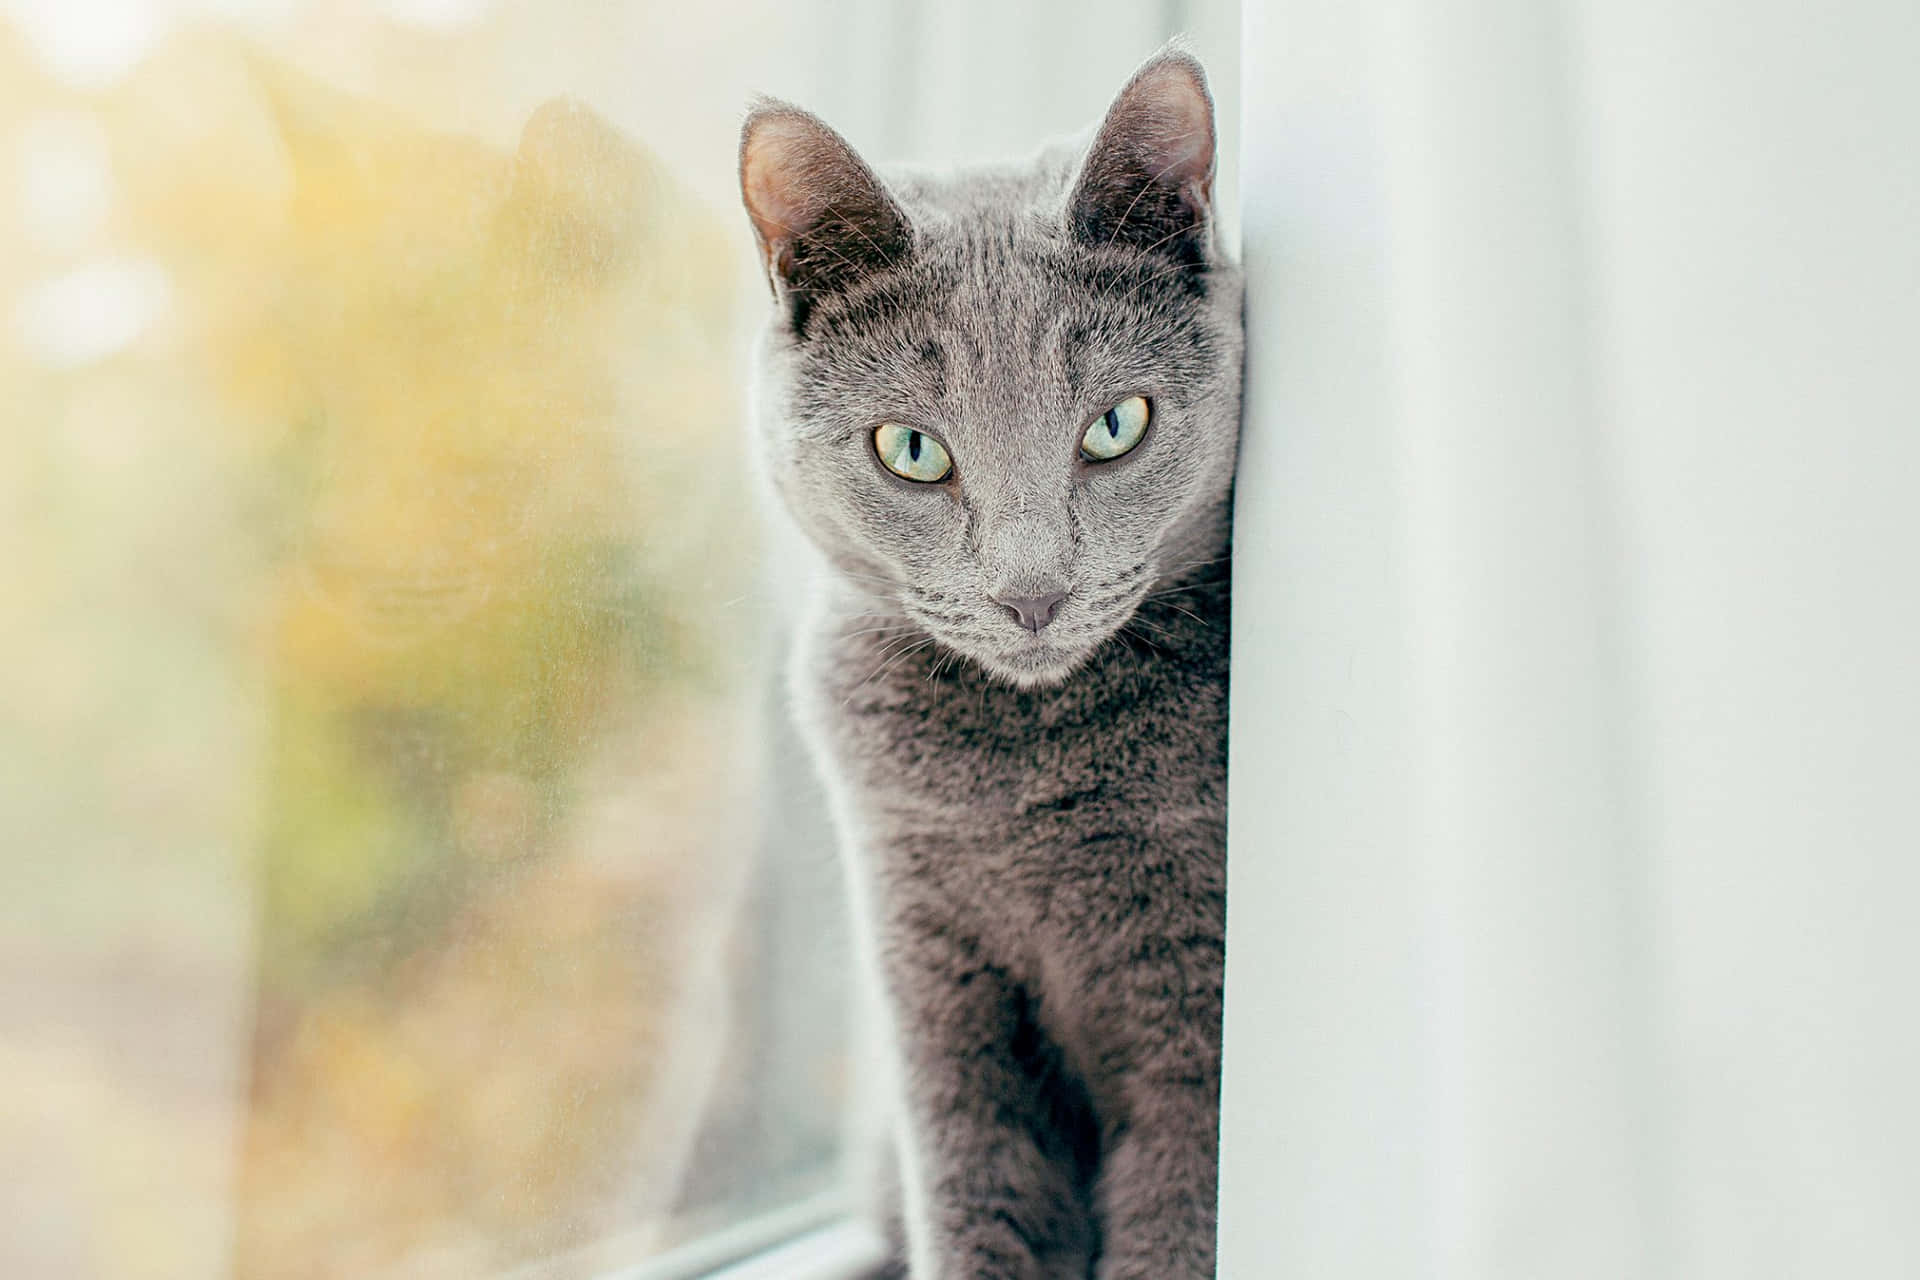 A beautiful Russian Blue Cat enjoys a peace and quiet moment